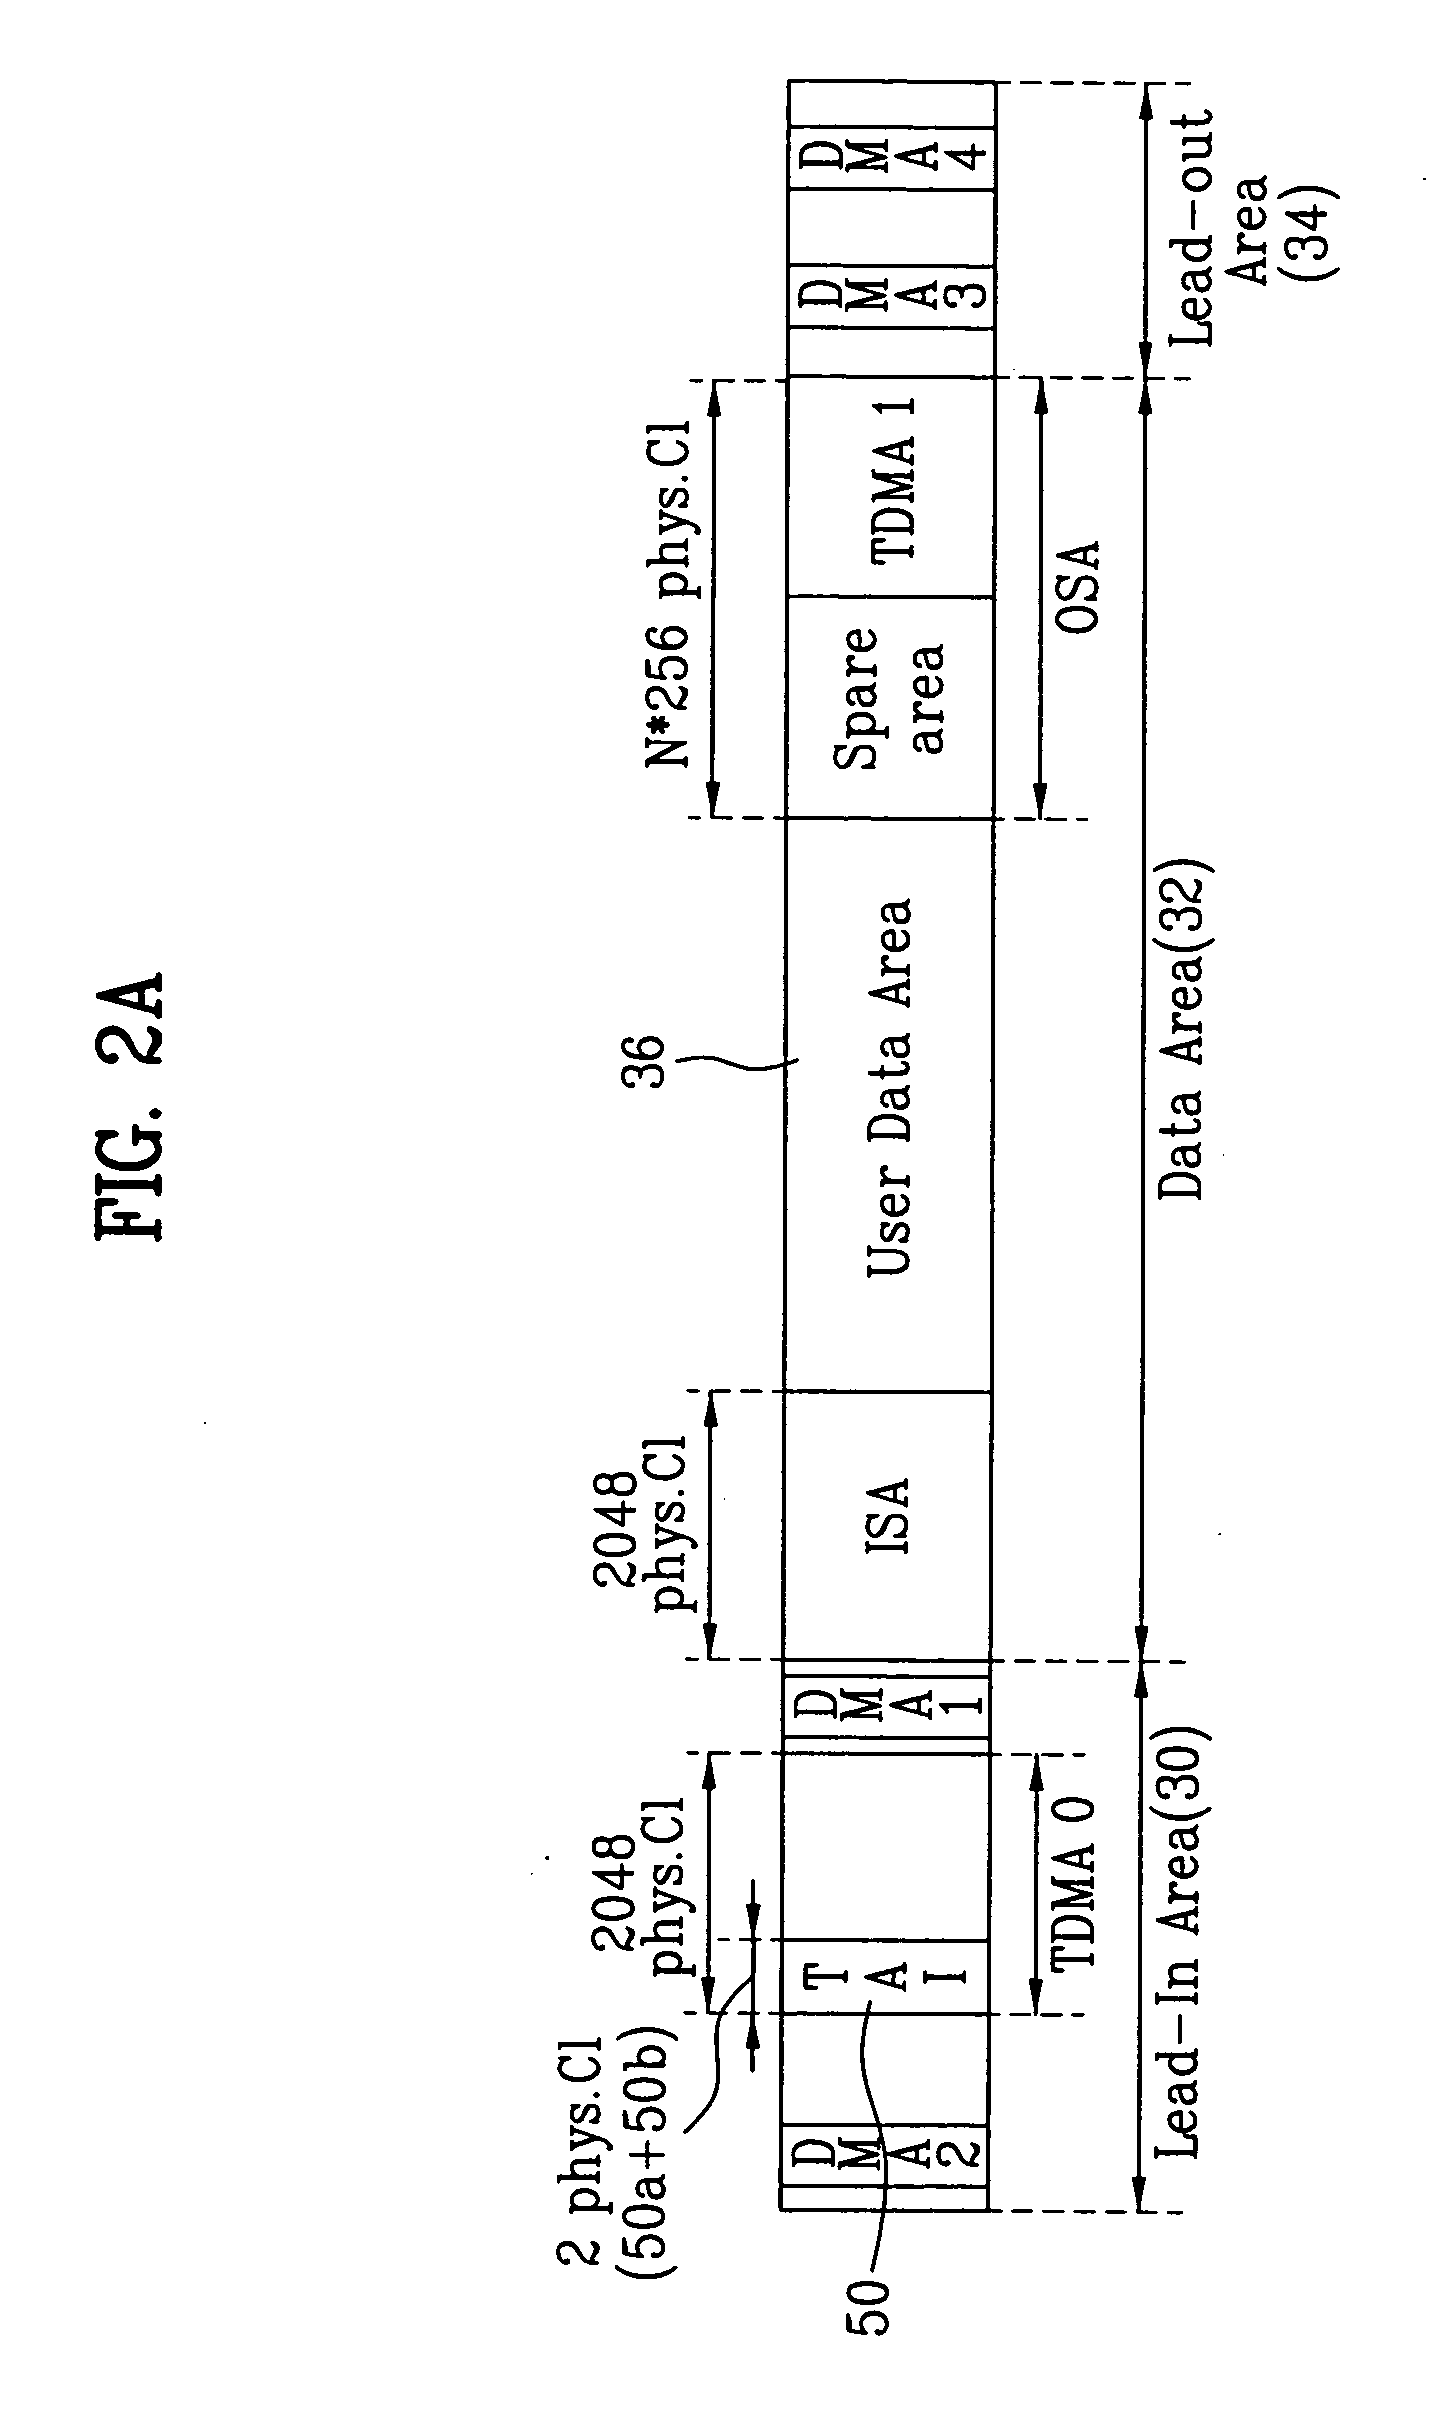 Write-once optical disc, and method and apparatus for recording/reproducing management information on/from optical disc